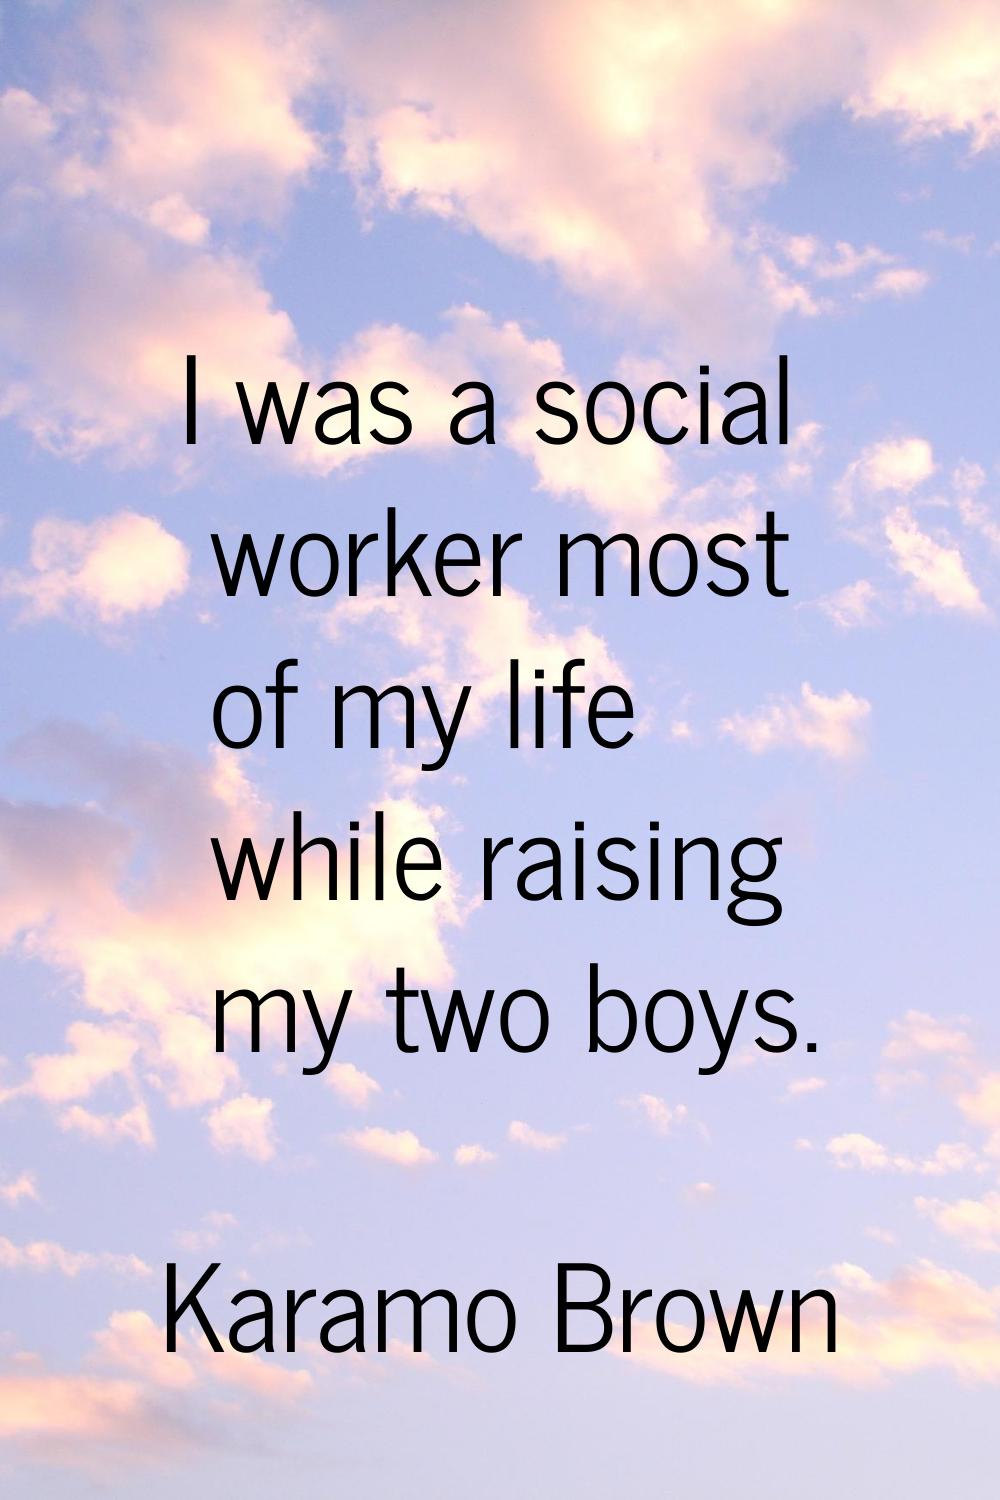 I was a social worker most of my life while raising my two boys.